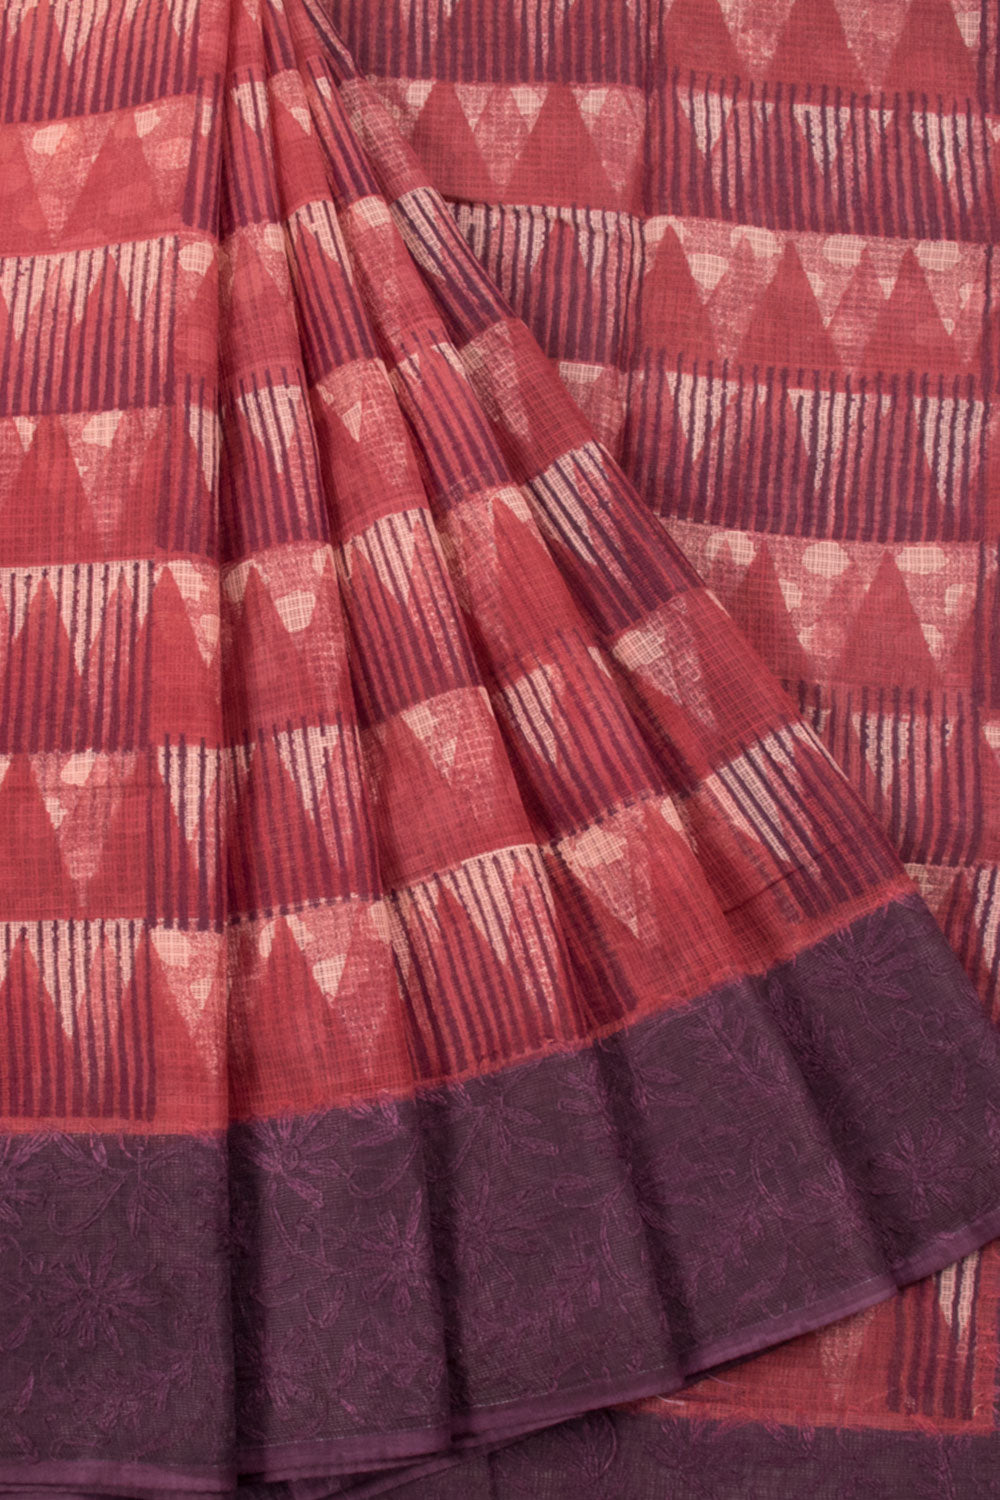 Handcrafted Shibori Dyed Kota Cotton Saree with Embroidered Border, Pallu and Blouse